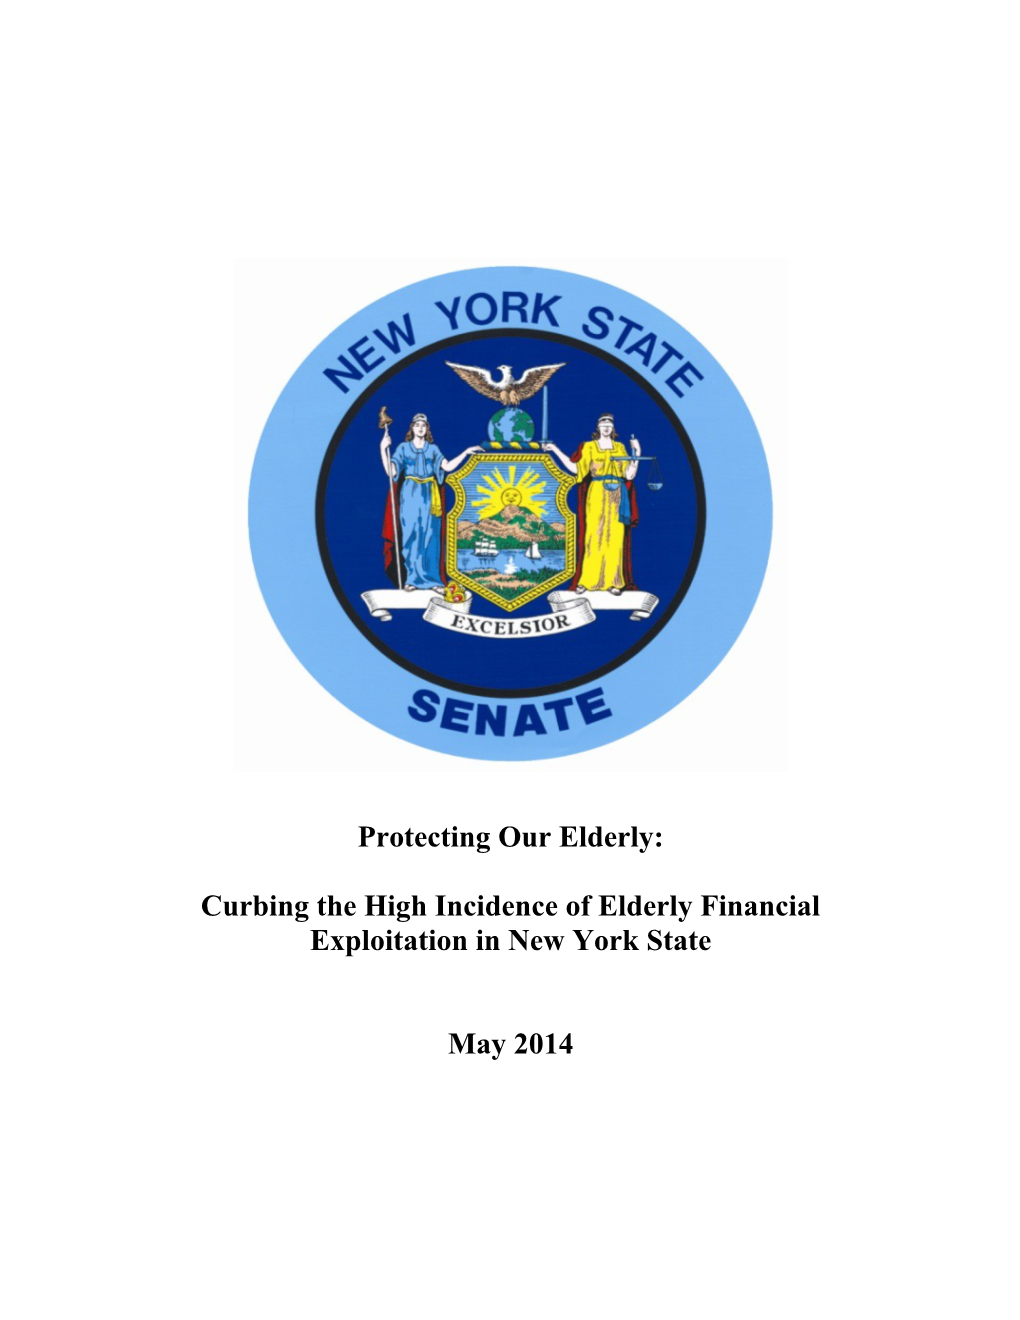 Curbing the High Incidence of Elderly Financial Exploitation in New York State